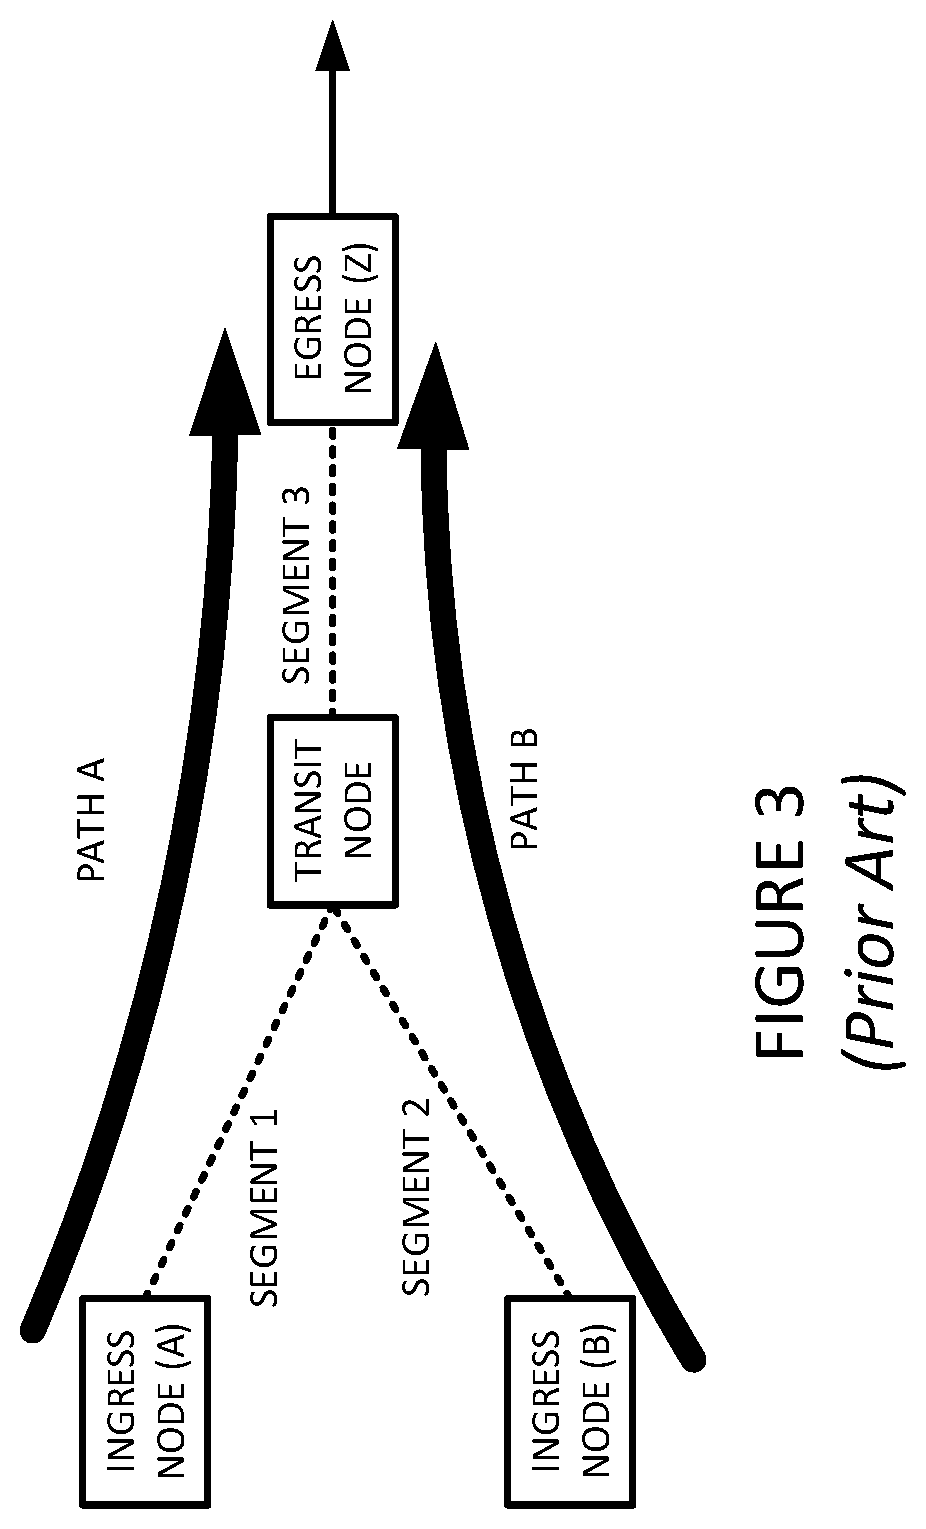 PING/TRACEROUTE FOR STATIC LABEL SWITCHED PATHS (LSPs) AND STATIC SEGMENT ROUTING TRAFFIC ENGINEERING (SRTE) TUNNELS